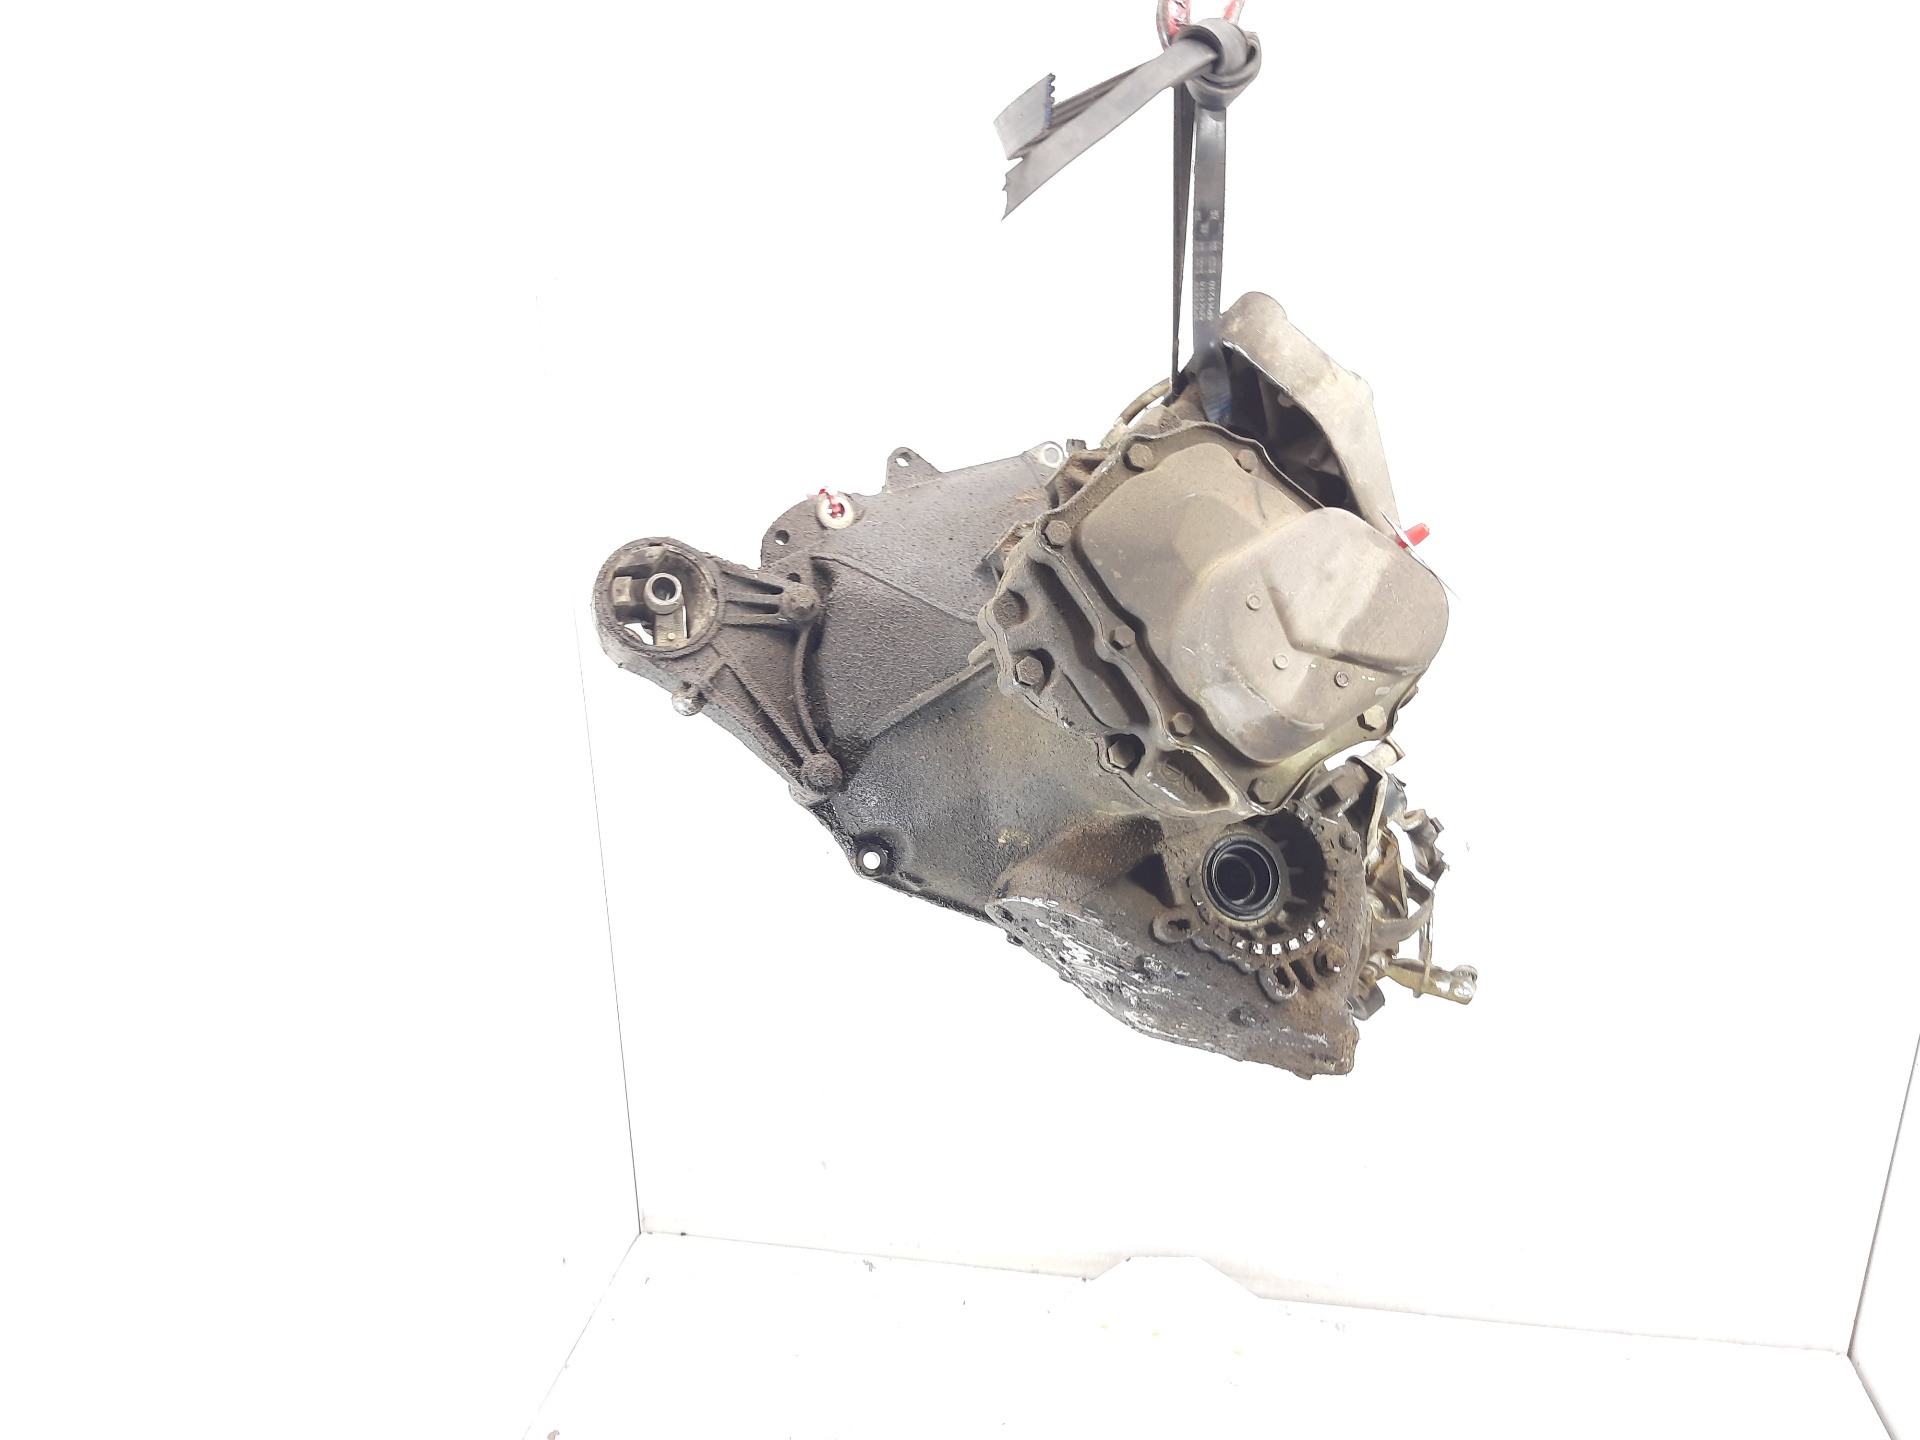 OPEL Astra H (2004-2014) Gearbox F17C374, 5VELOCIDADES 22327126